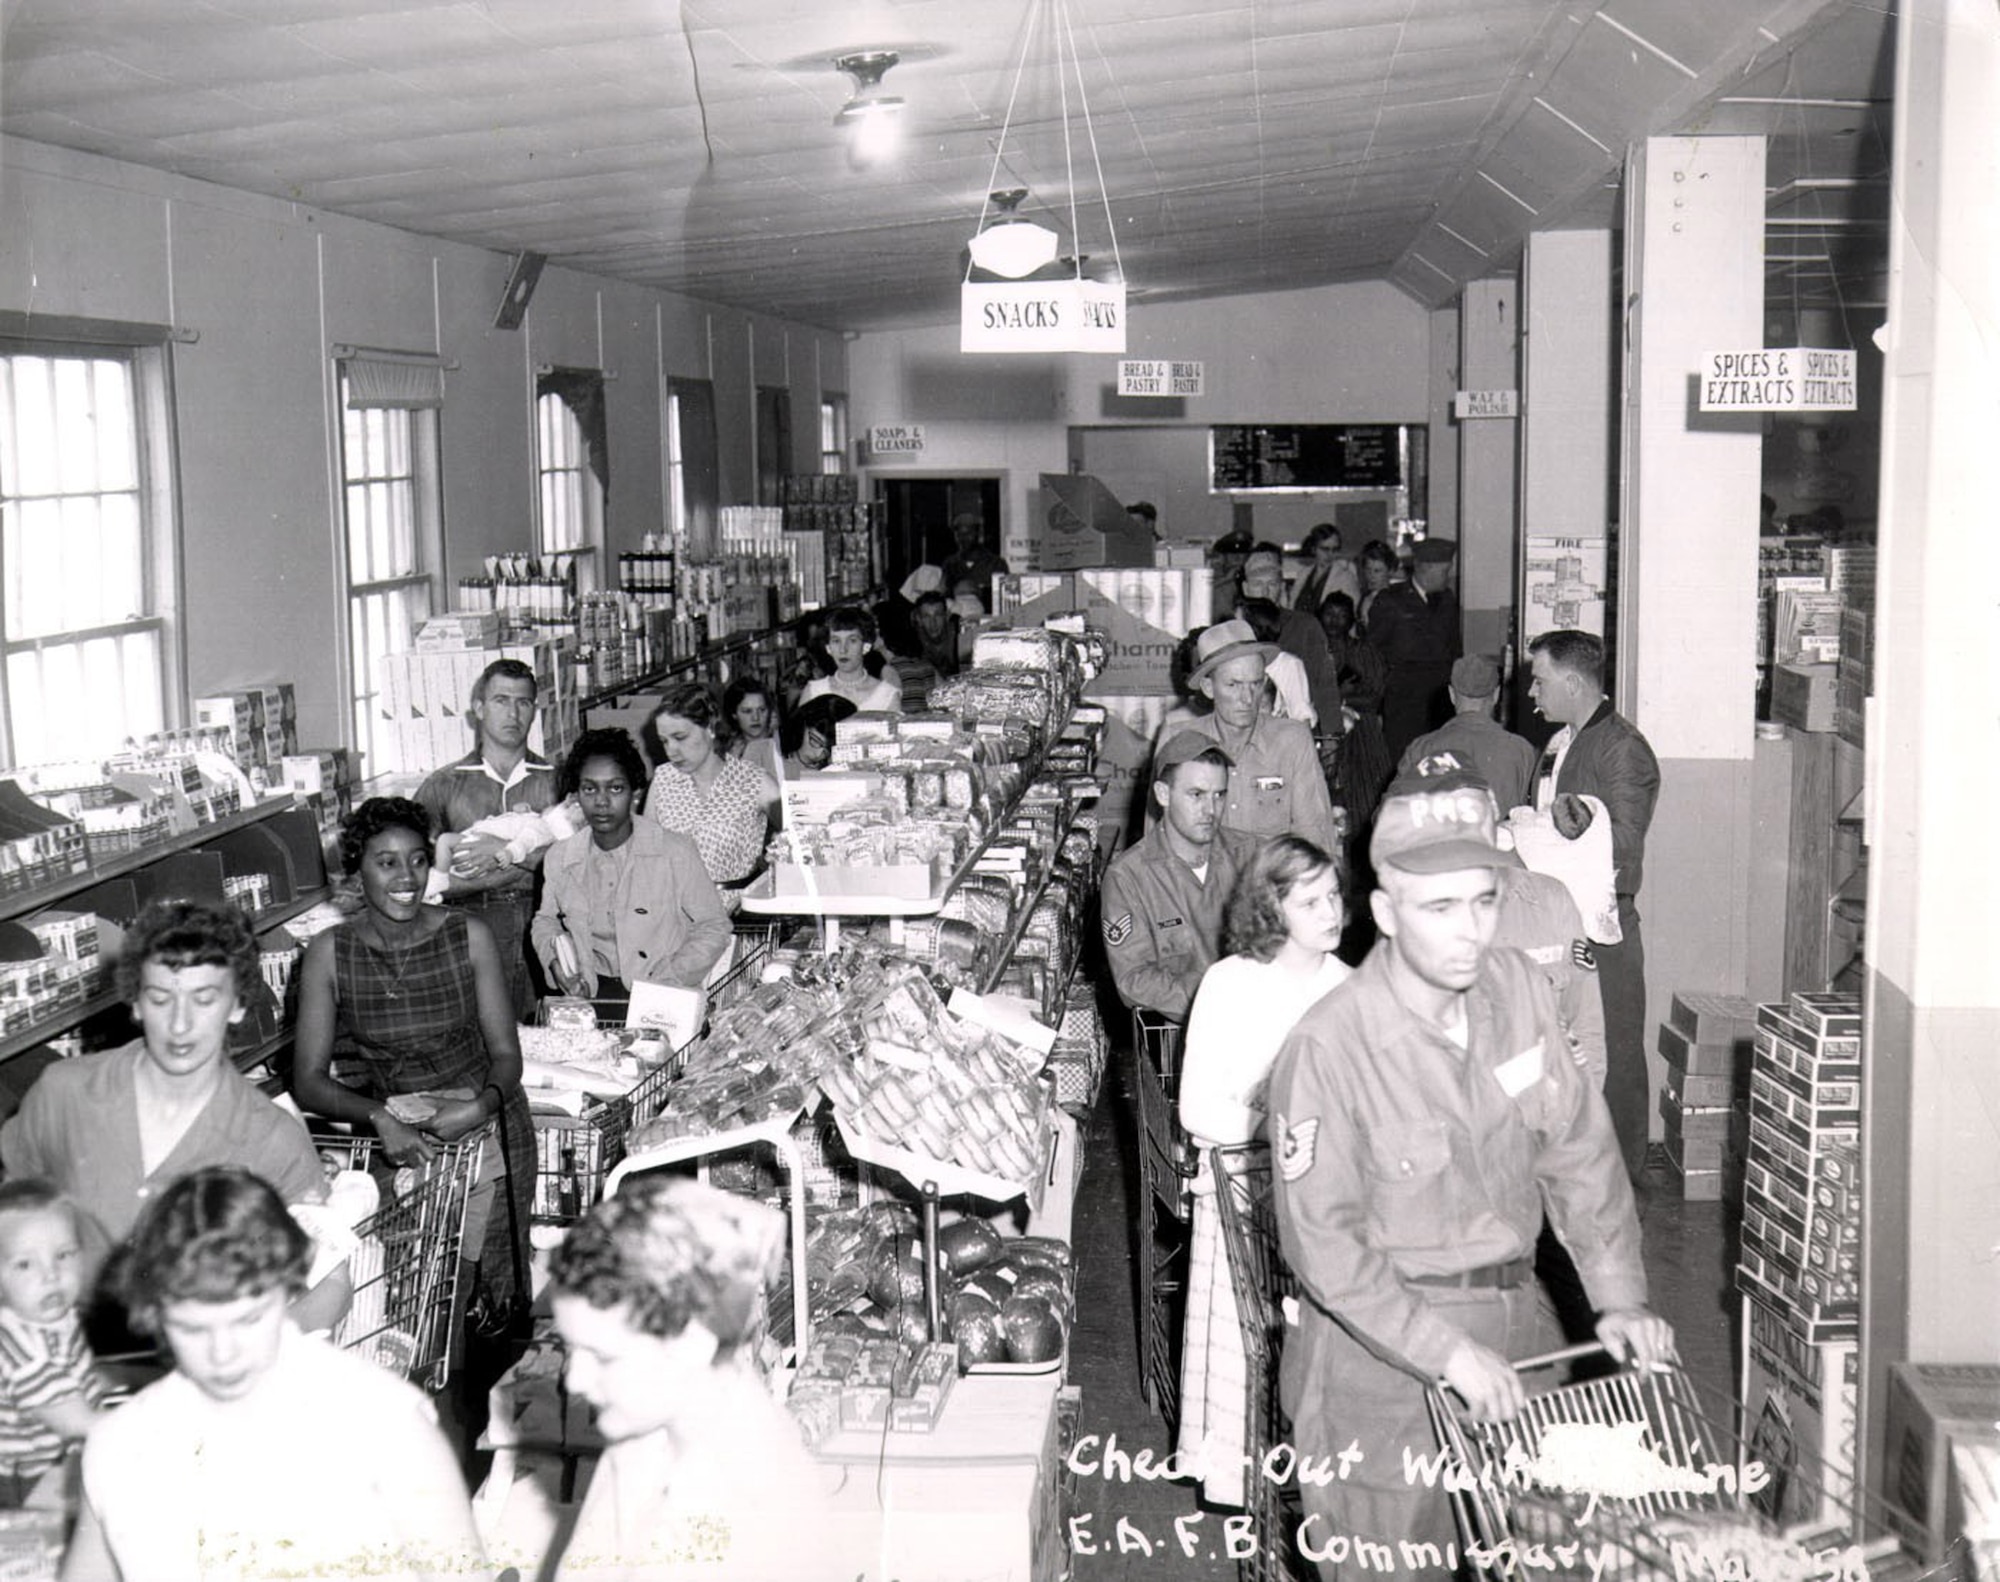 Patrons line up to check out their groceries at Ellsworth Air Force Base, South Dakota, in 1958. (Courtesy photo)